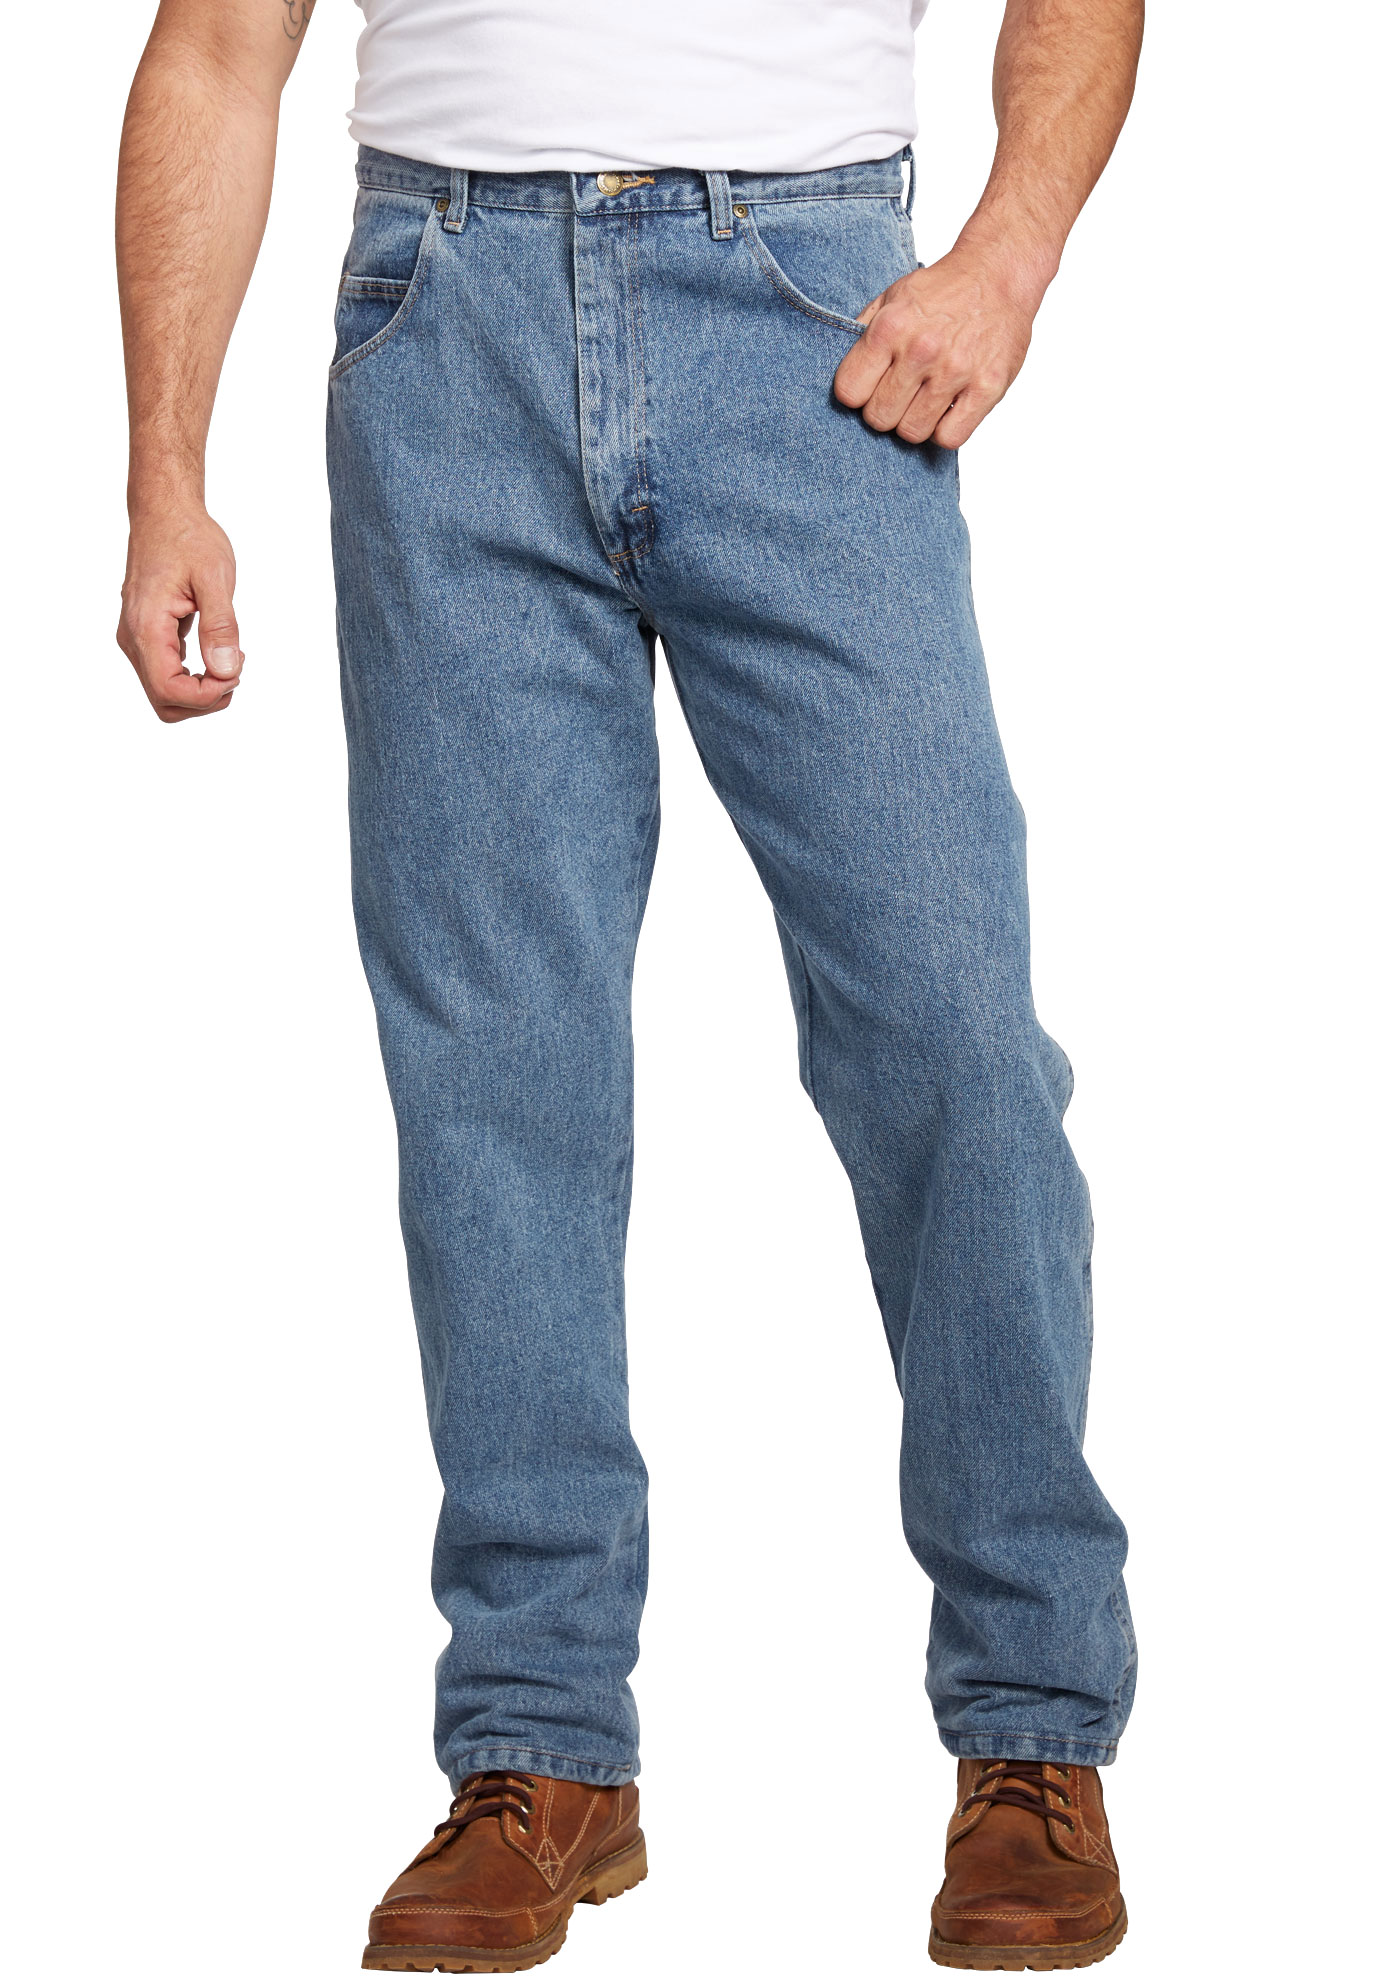 Wrangler Men's Big & Tall  Relaxed Fit Classic Jeans - image 1 of 6